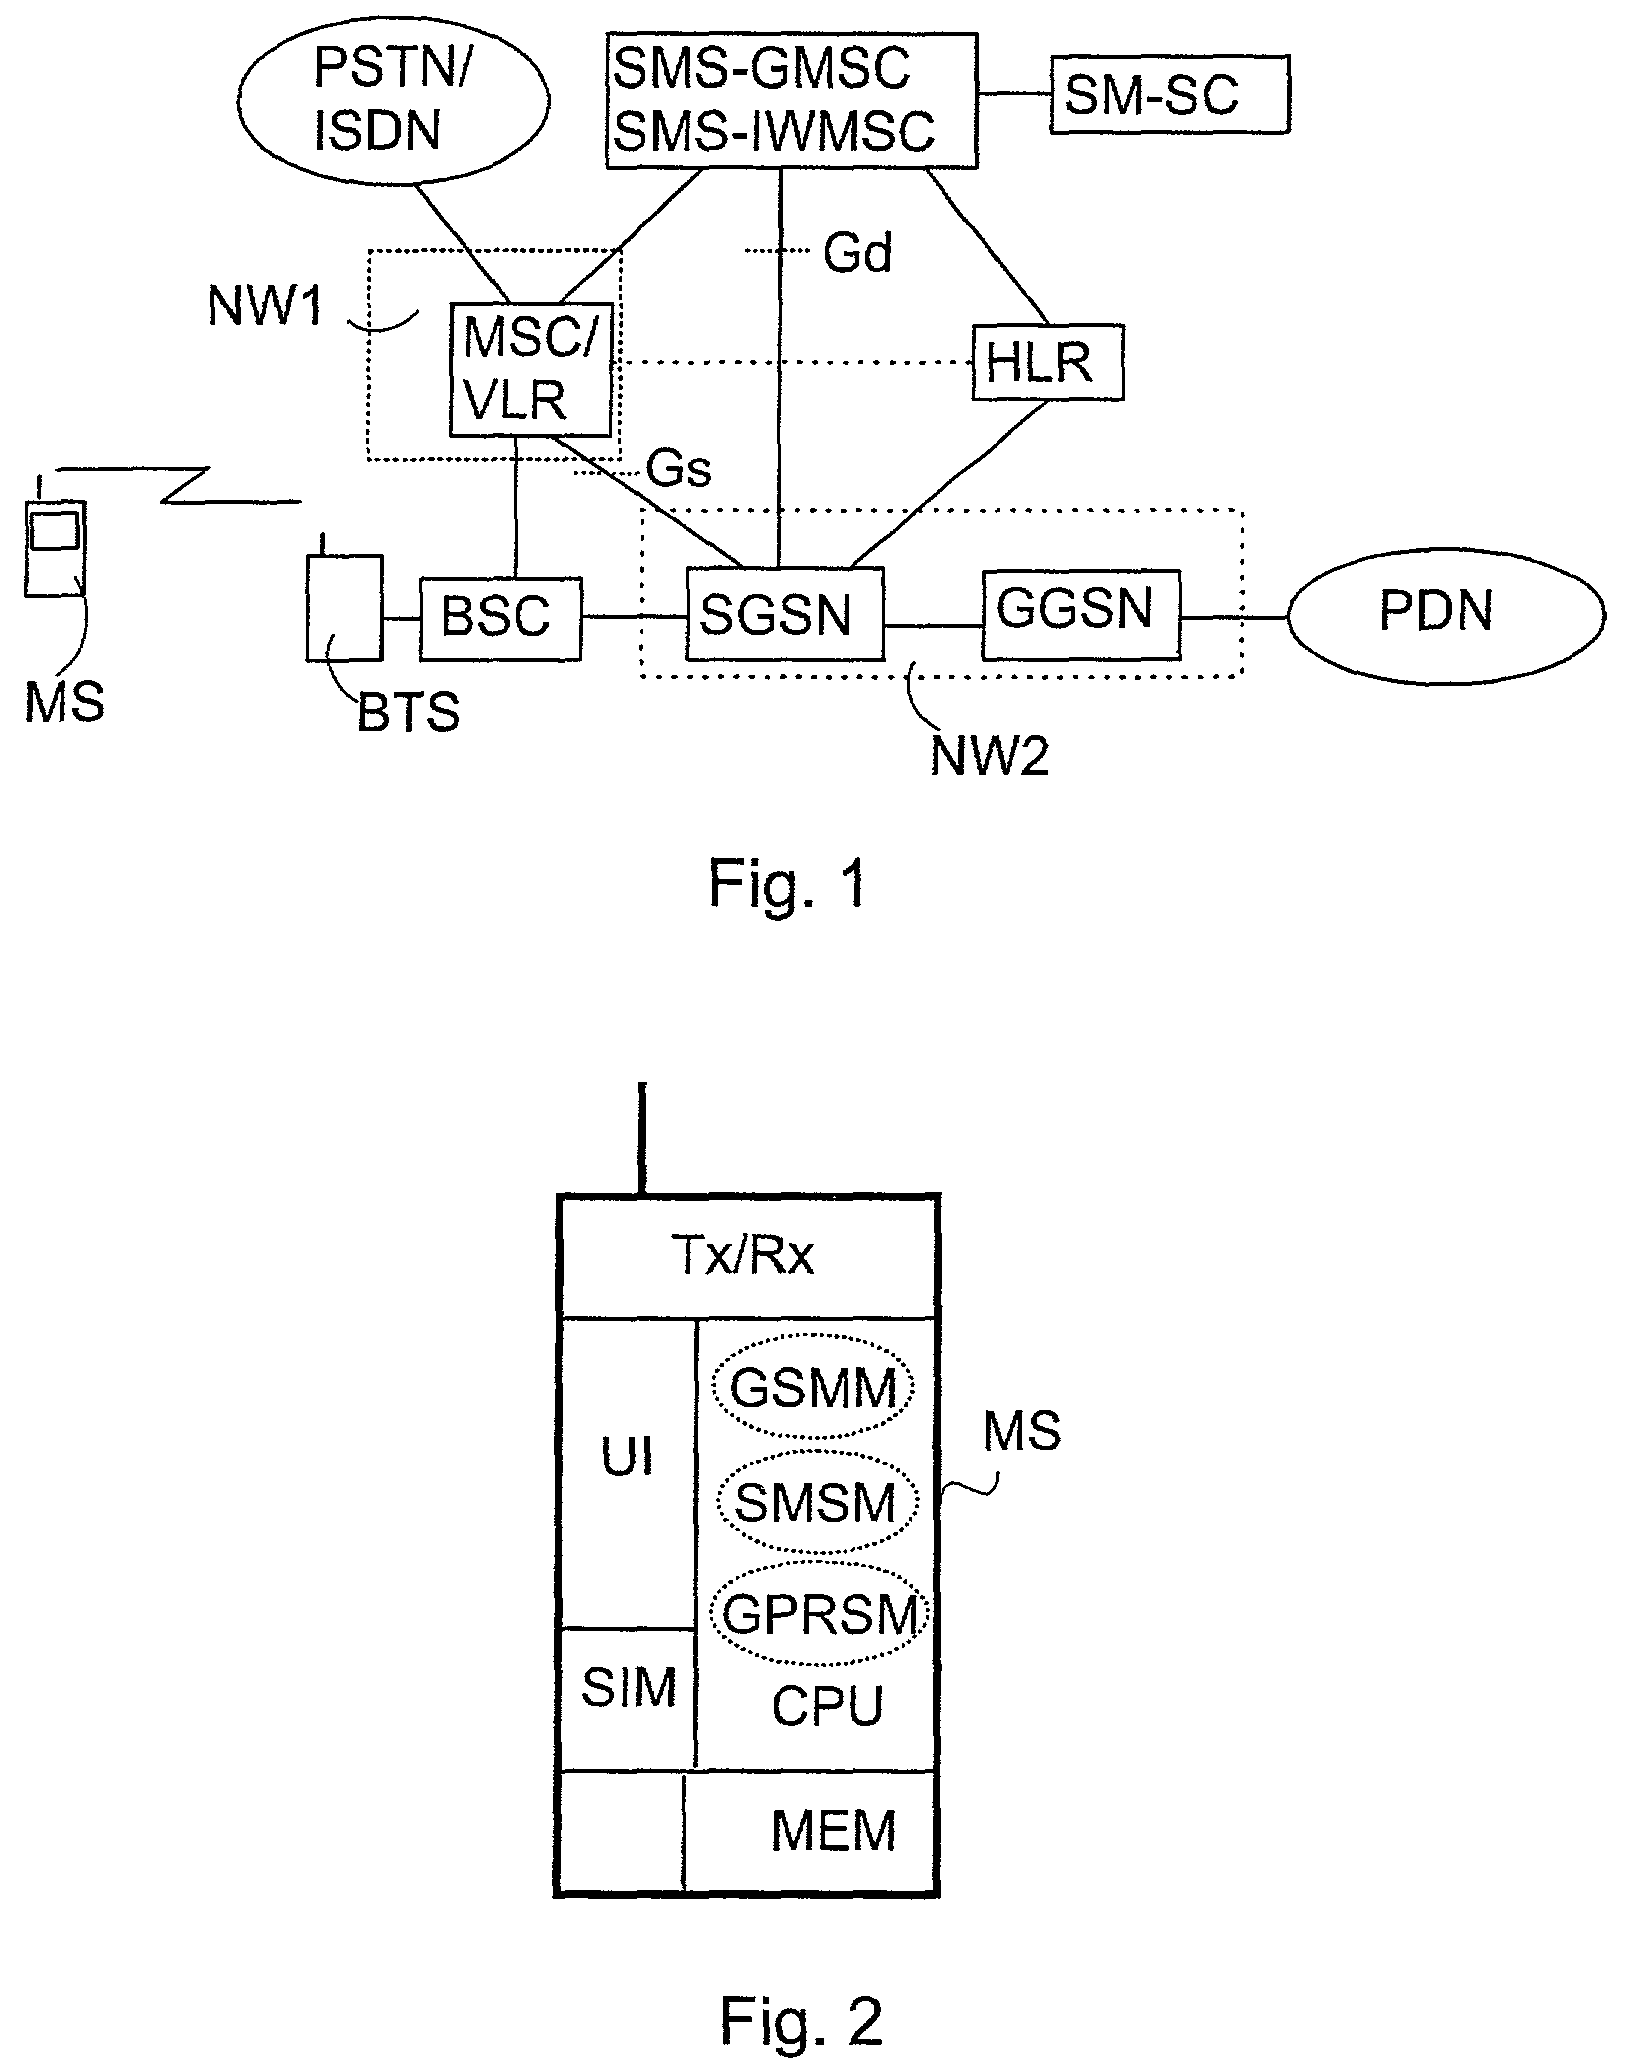 Transmitting messages in telecommunication system comprising a packet radio network